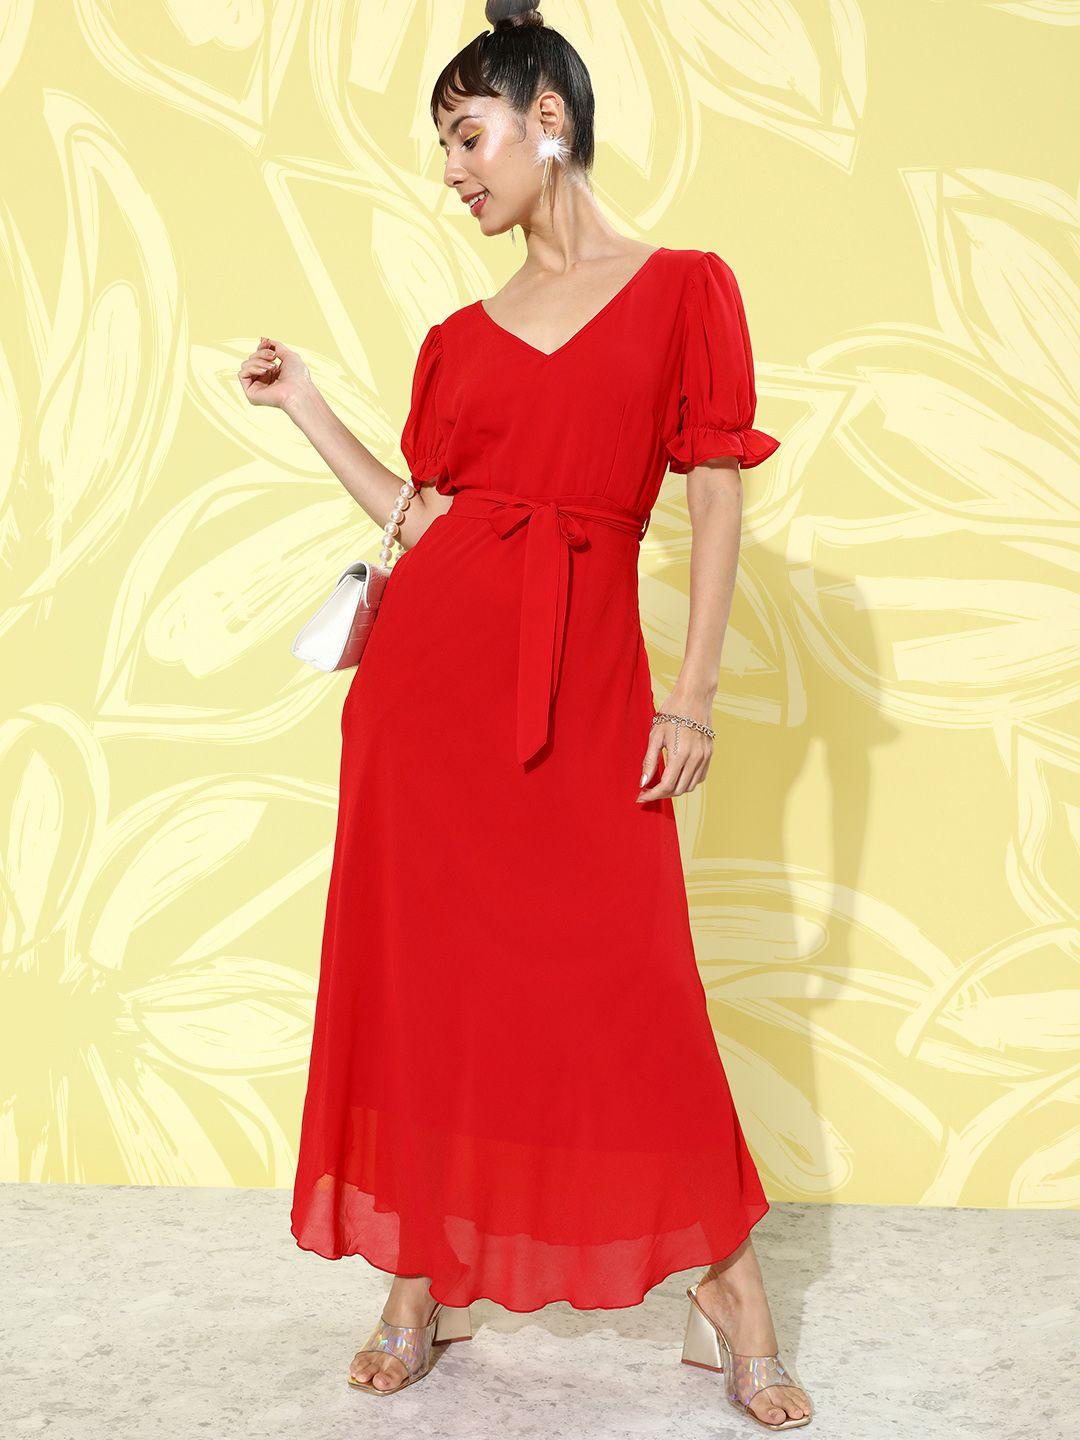 dressberry bright red puff sleeve vacay chill sundress a-line maxi dress